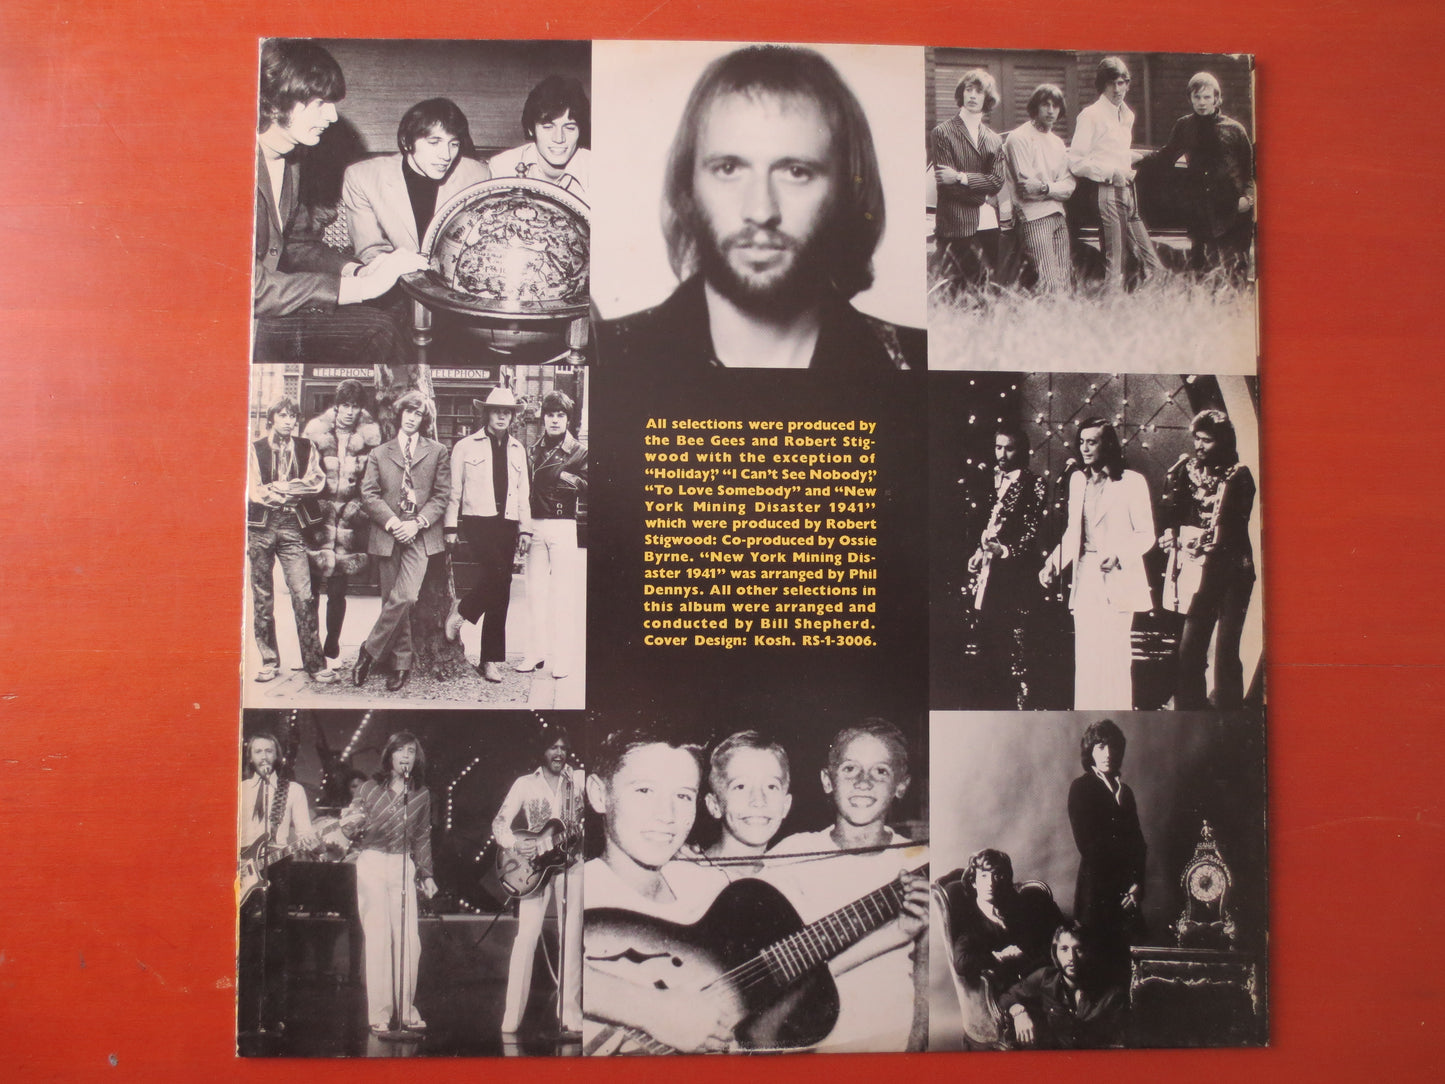 The BEE GEES, GOLD, Vol 1, The Bee Gees Records, The Bee Gees lps, Vintage Vinyl, Record Vinyl, Vinyl Record, 1976 Records